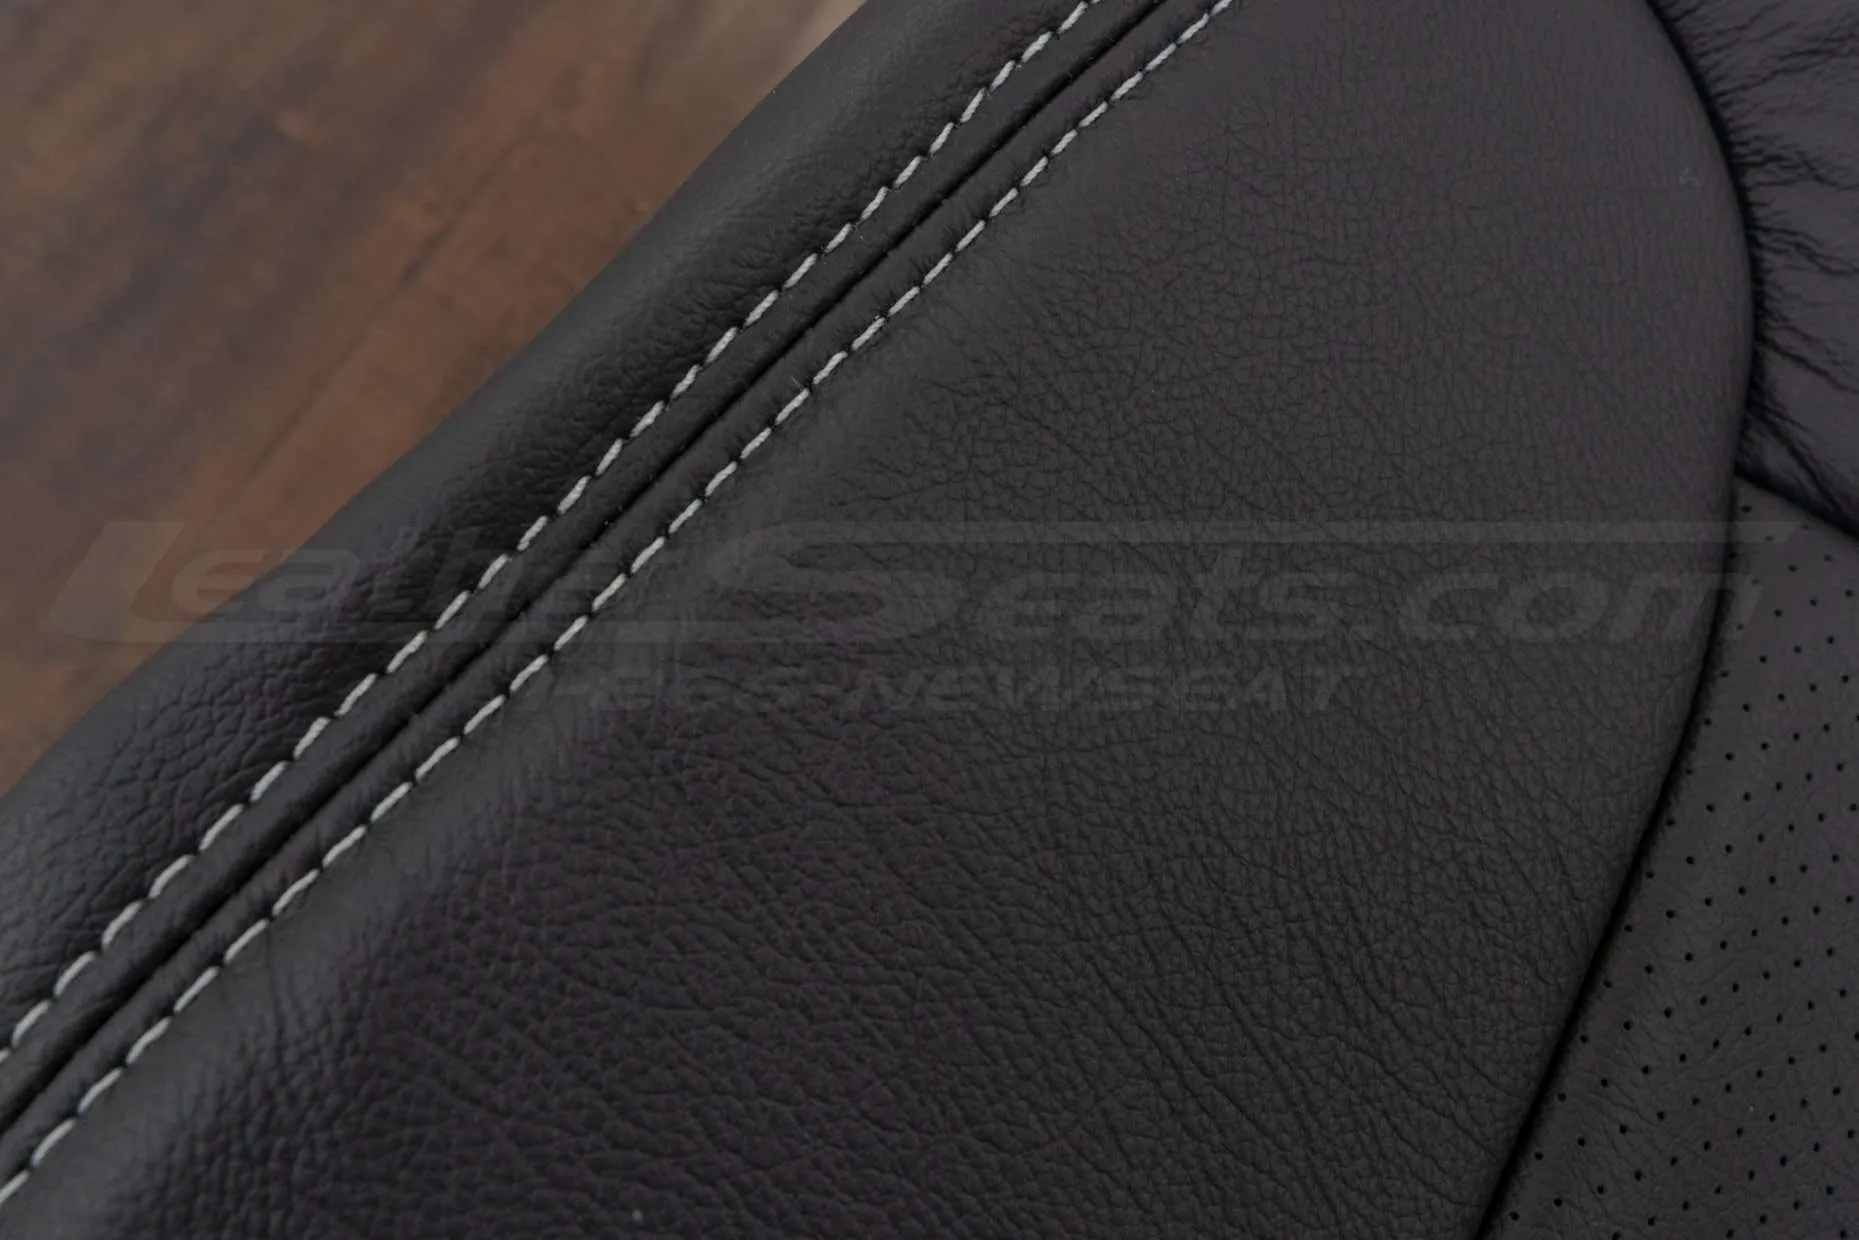 Contrasting Dove Grey double-stitching on Dark Graphite leather